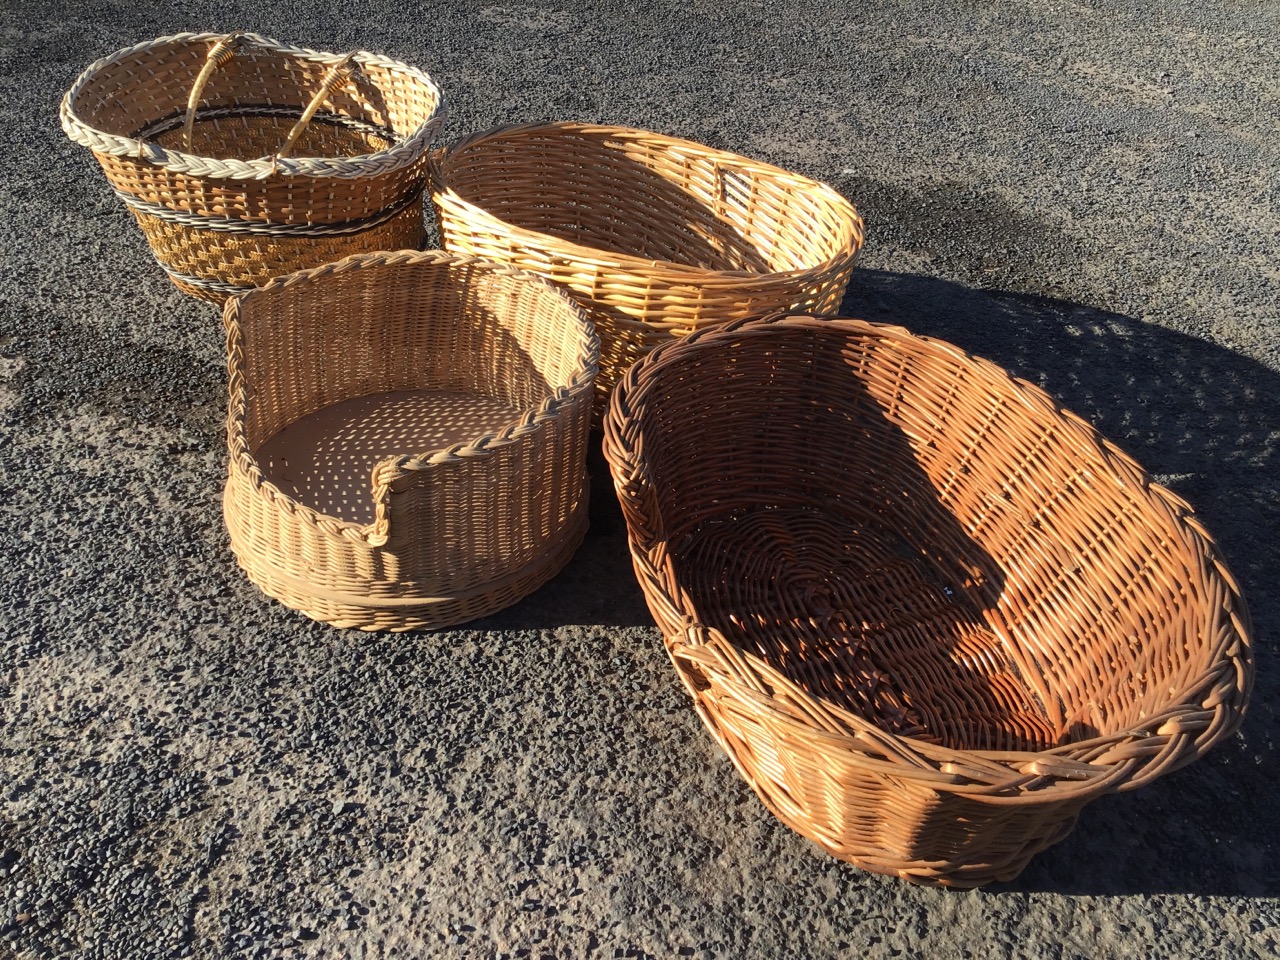 Eight baskets - wastepaper, shopping, dog, oval, bread, etc. (8) - Image 2 of 3